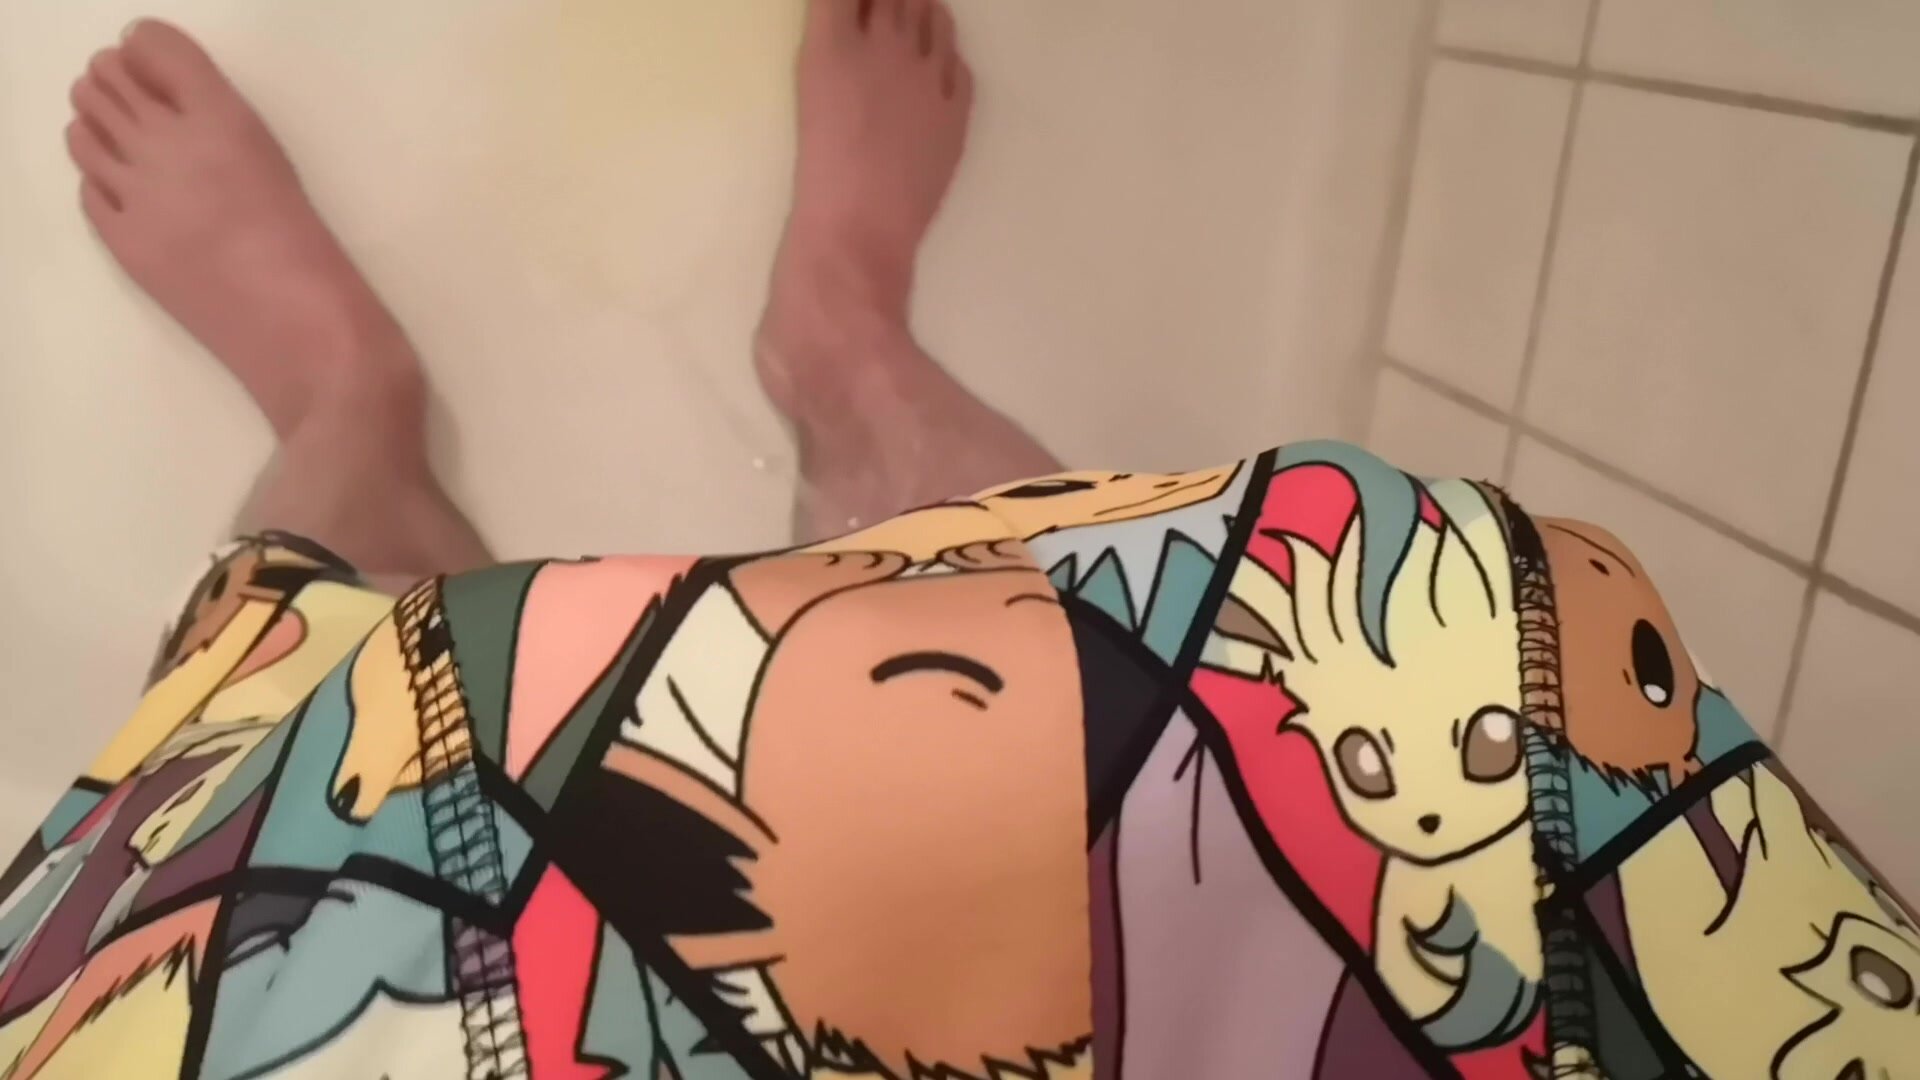 (old video) Pissing small plushies in undies